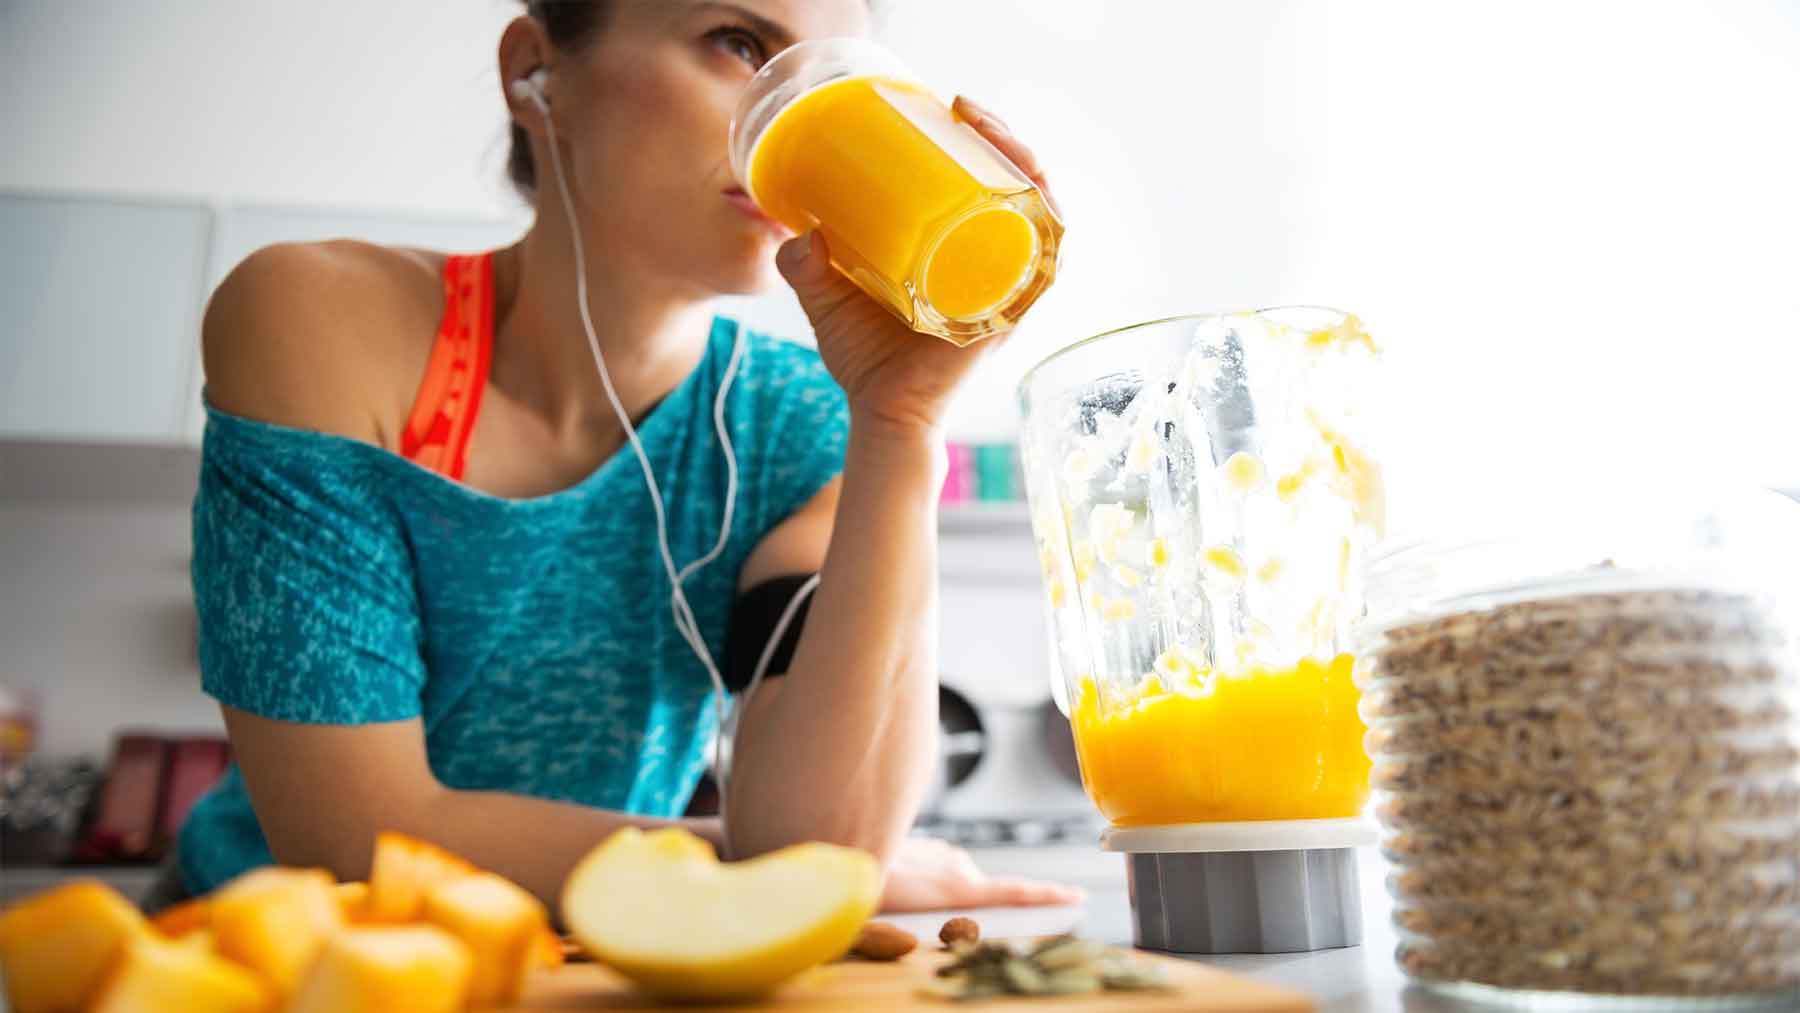 Fueling fitness: What and when you eat can impact your performance - Mayo  Clinic Press